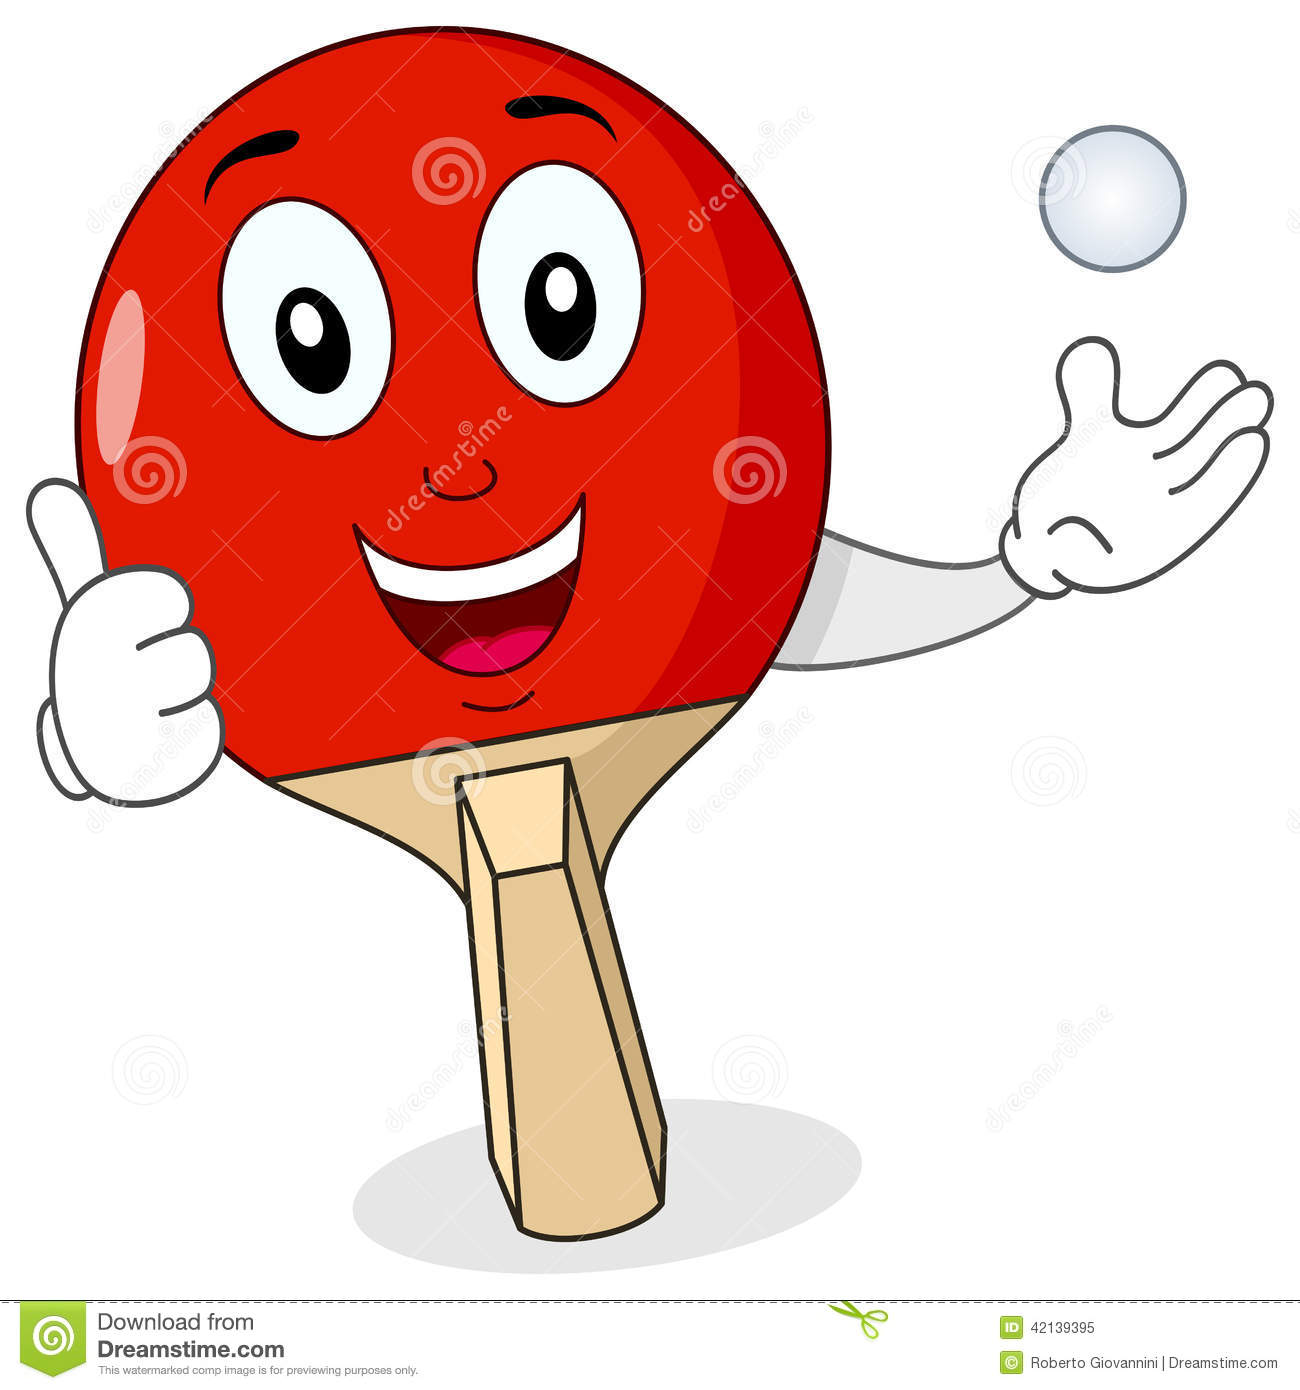 Cheerful Cartoon Red Ping Pong Or Table Tennis Racket Character With